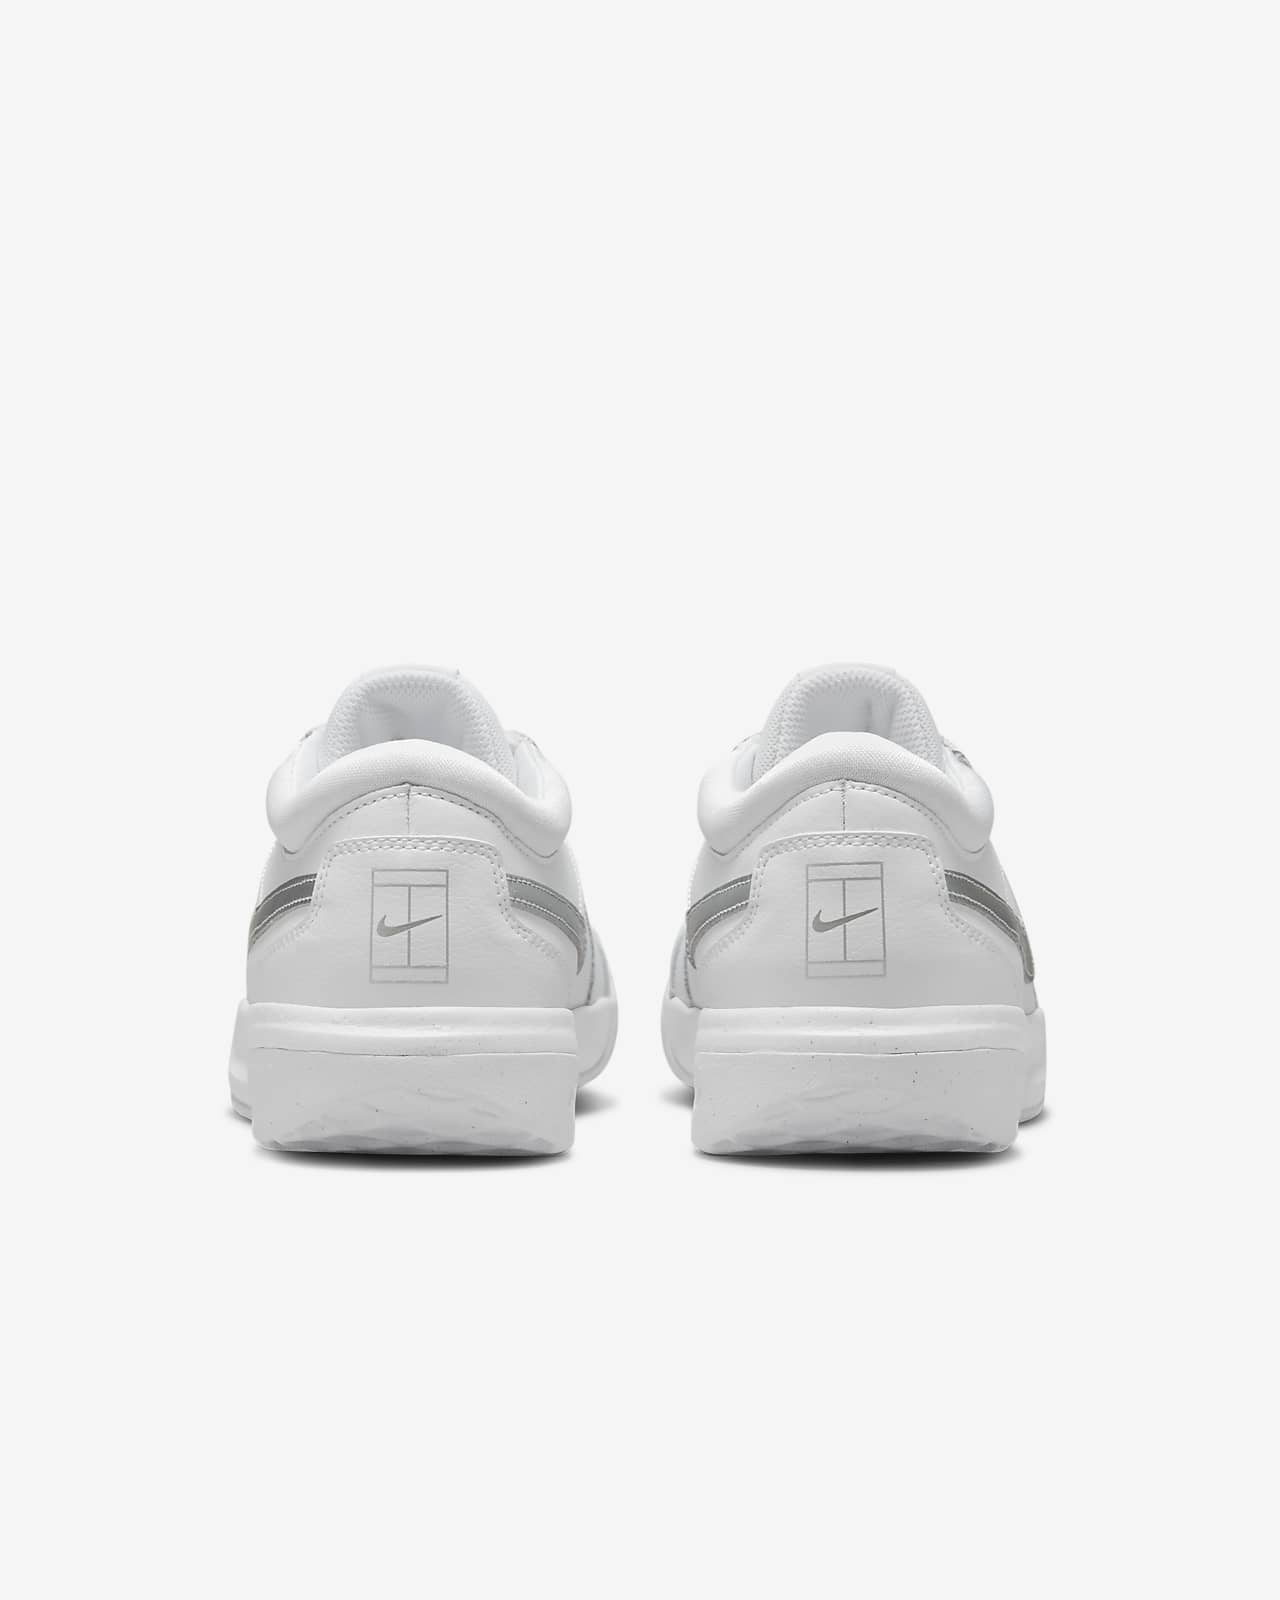 nike women's white leather tennis shoes